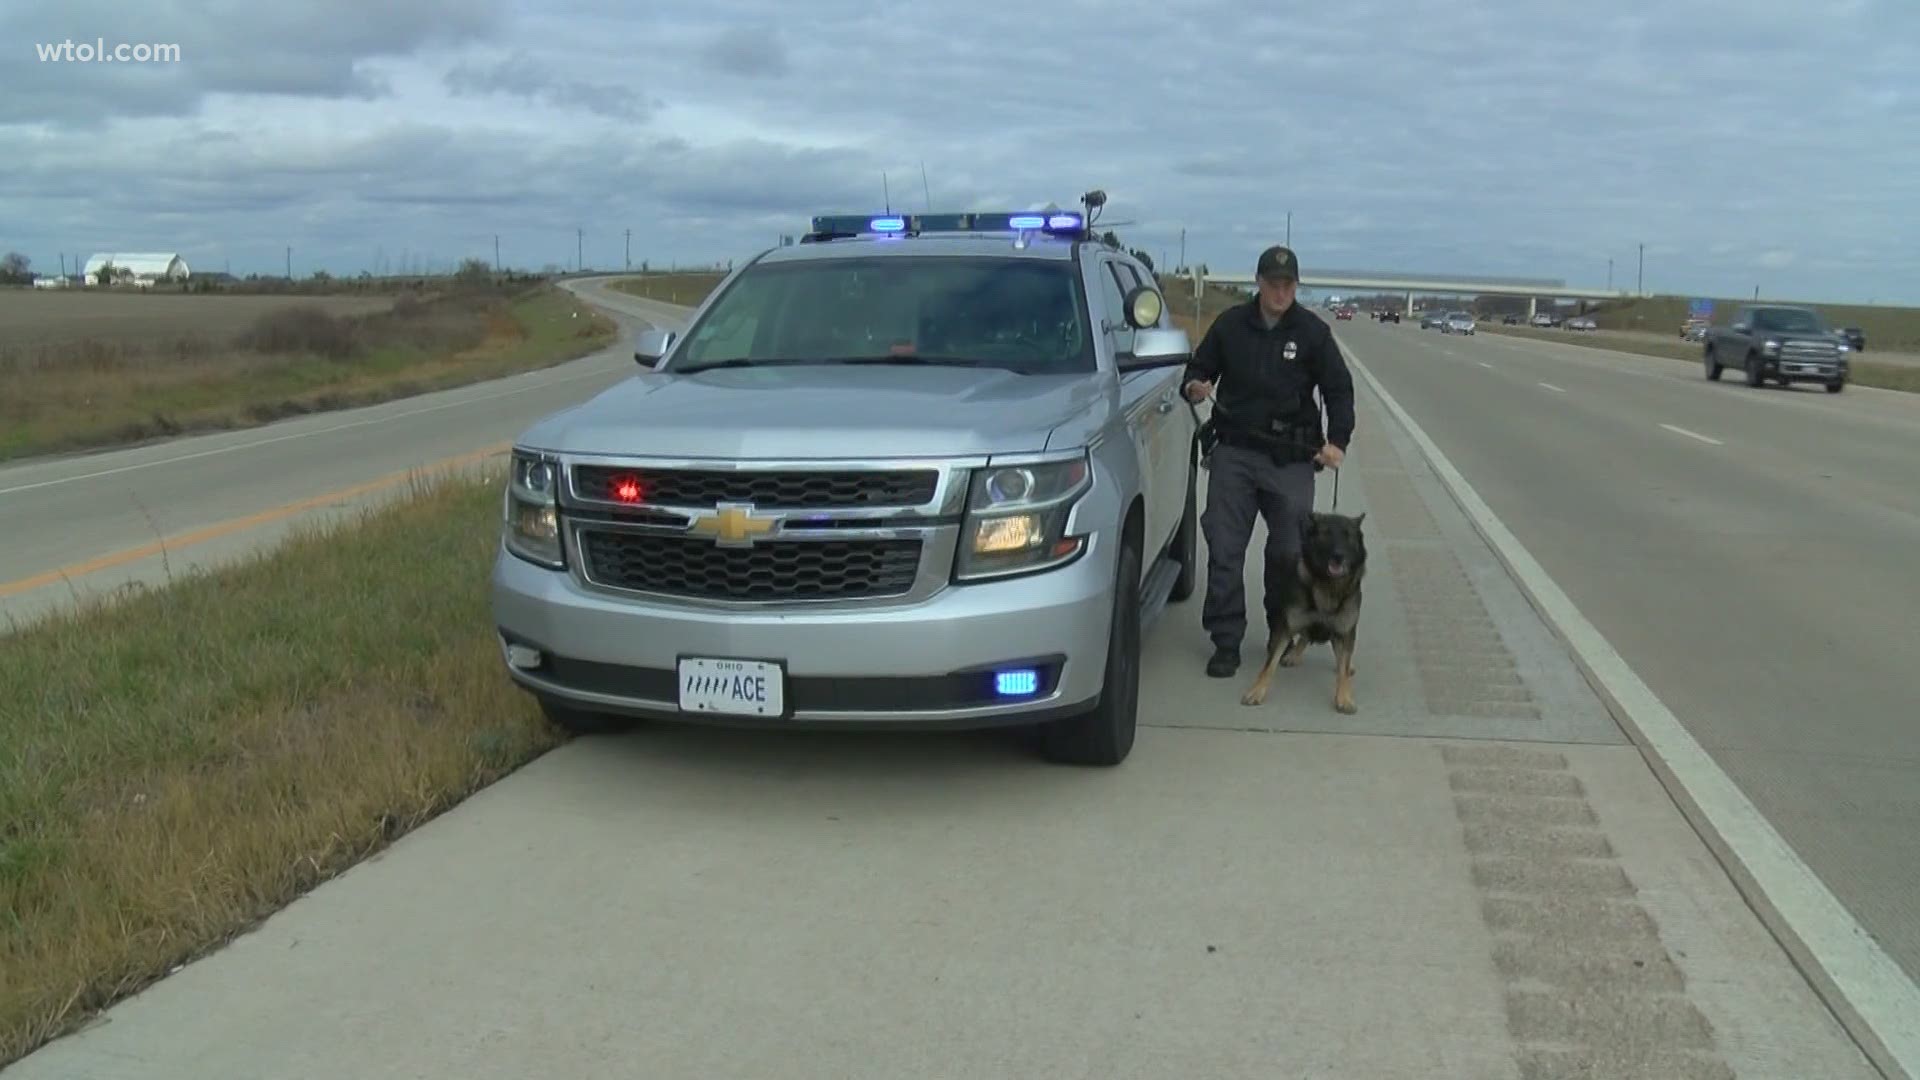 Officers with the Ohio State Highway Patrol explain the role that K9 officers play, with a knowing nose to find criminal activity otherwise undetected by humans.